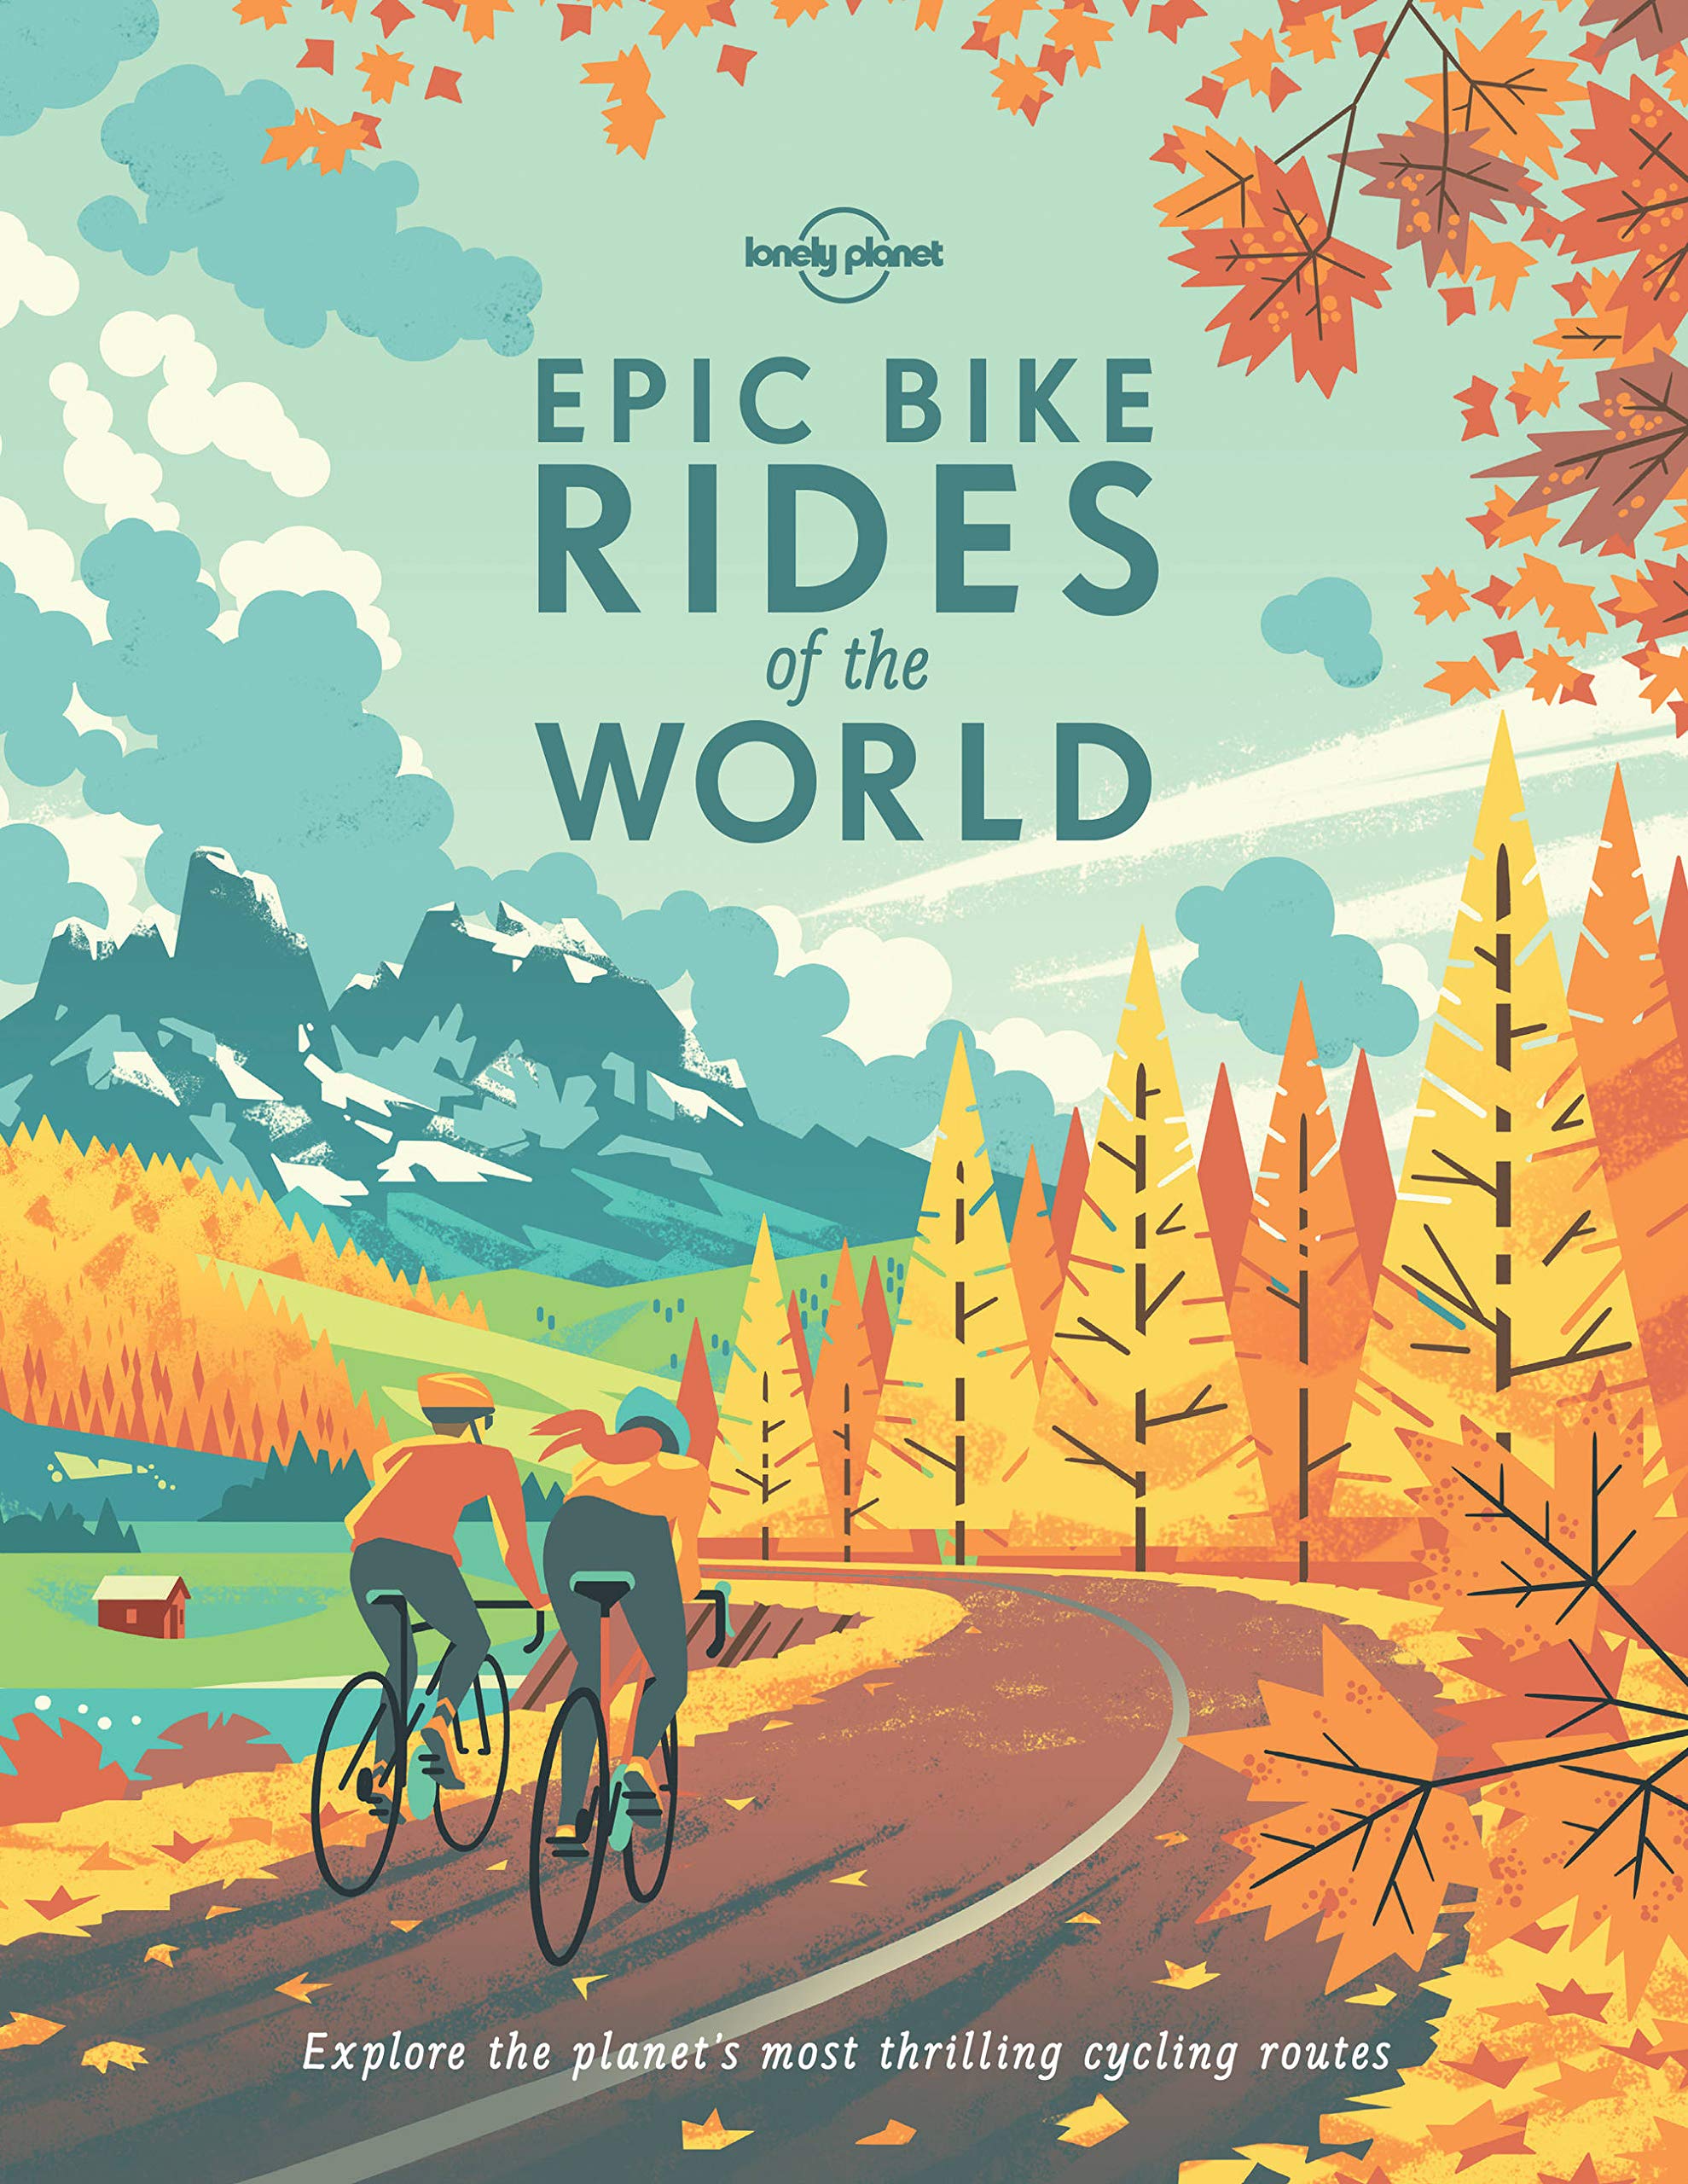 Wheelhouse　LONELY　Shop　WORLD　PLANET　THE　RIDES　EPIC　OF　BIKE　The　Boutique　Bike